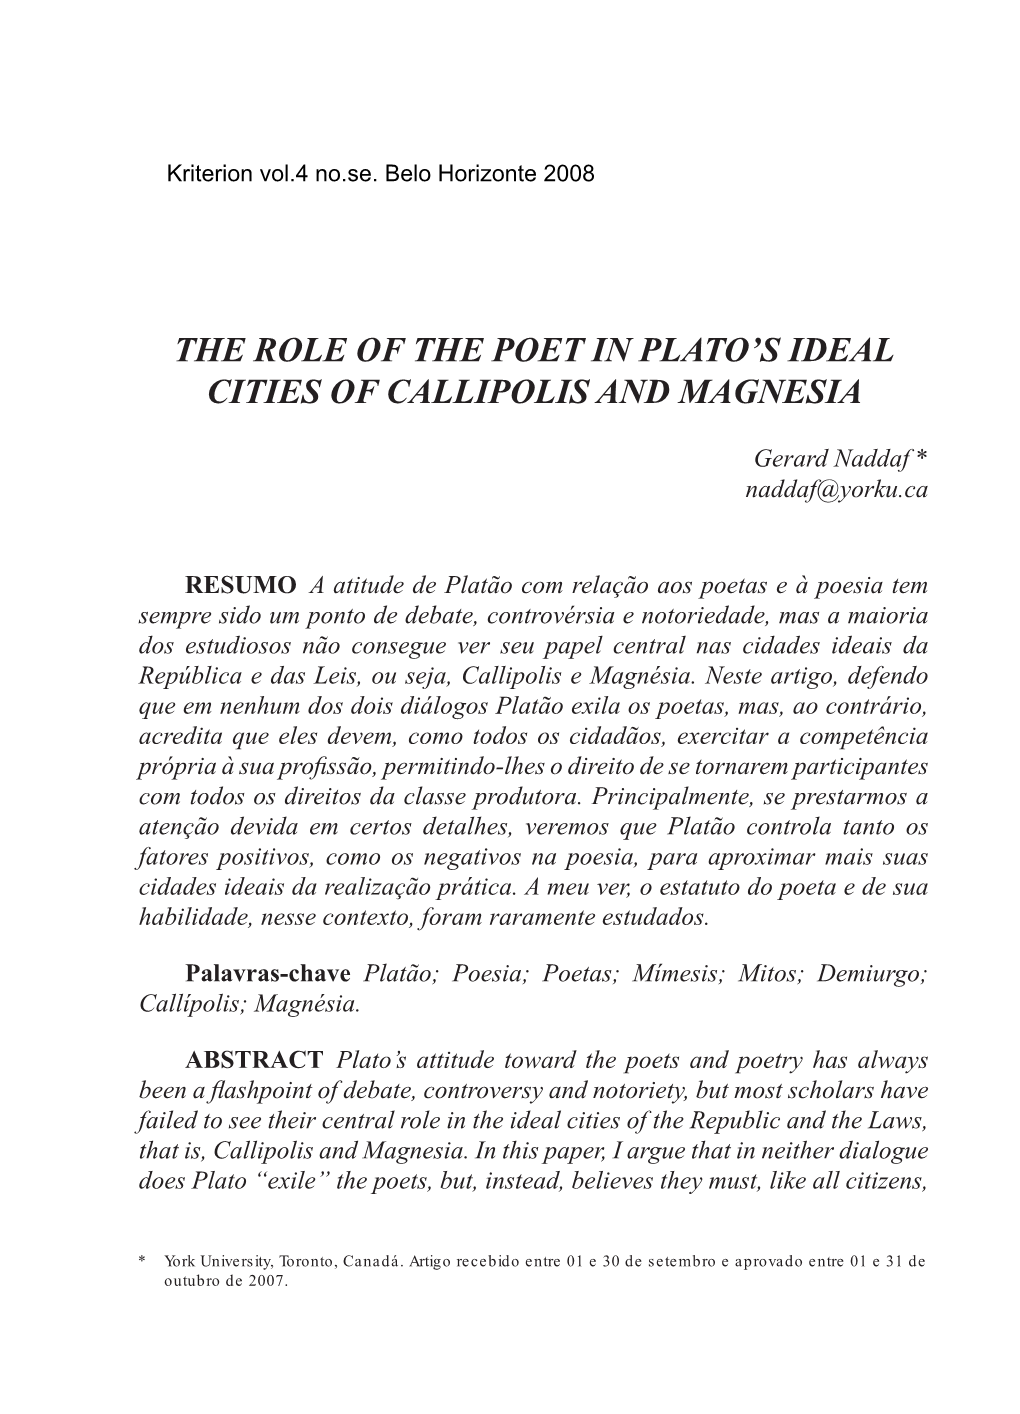 The Role of the Poet in Plato's Ideal Cities of Callipolis